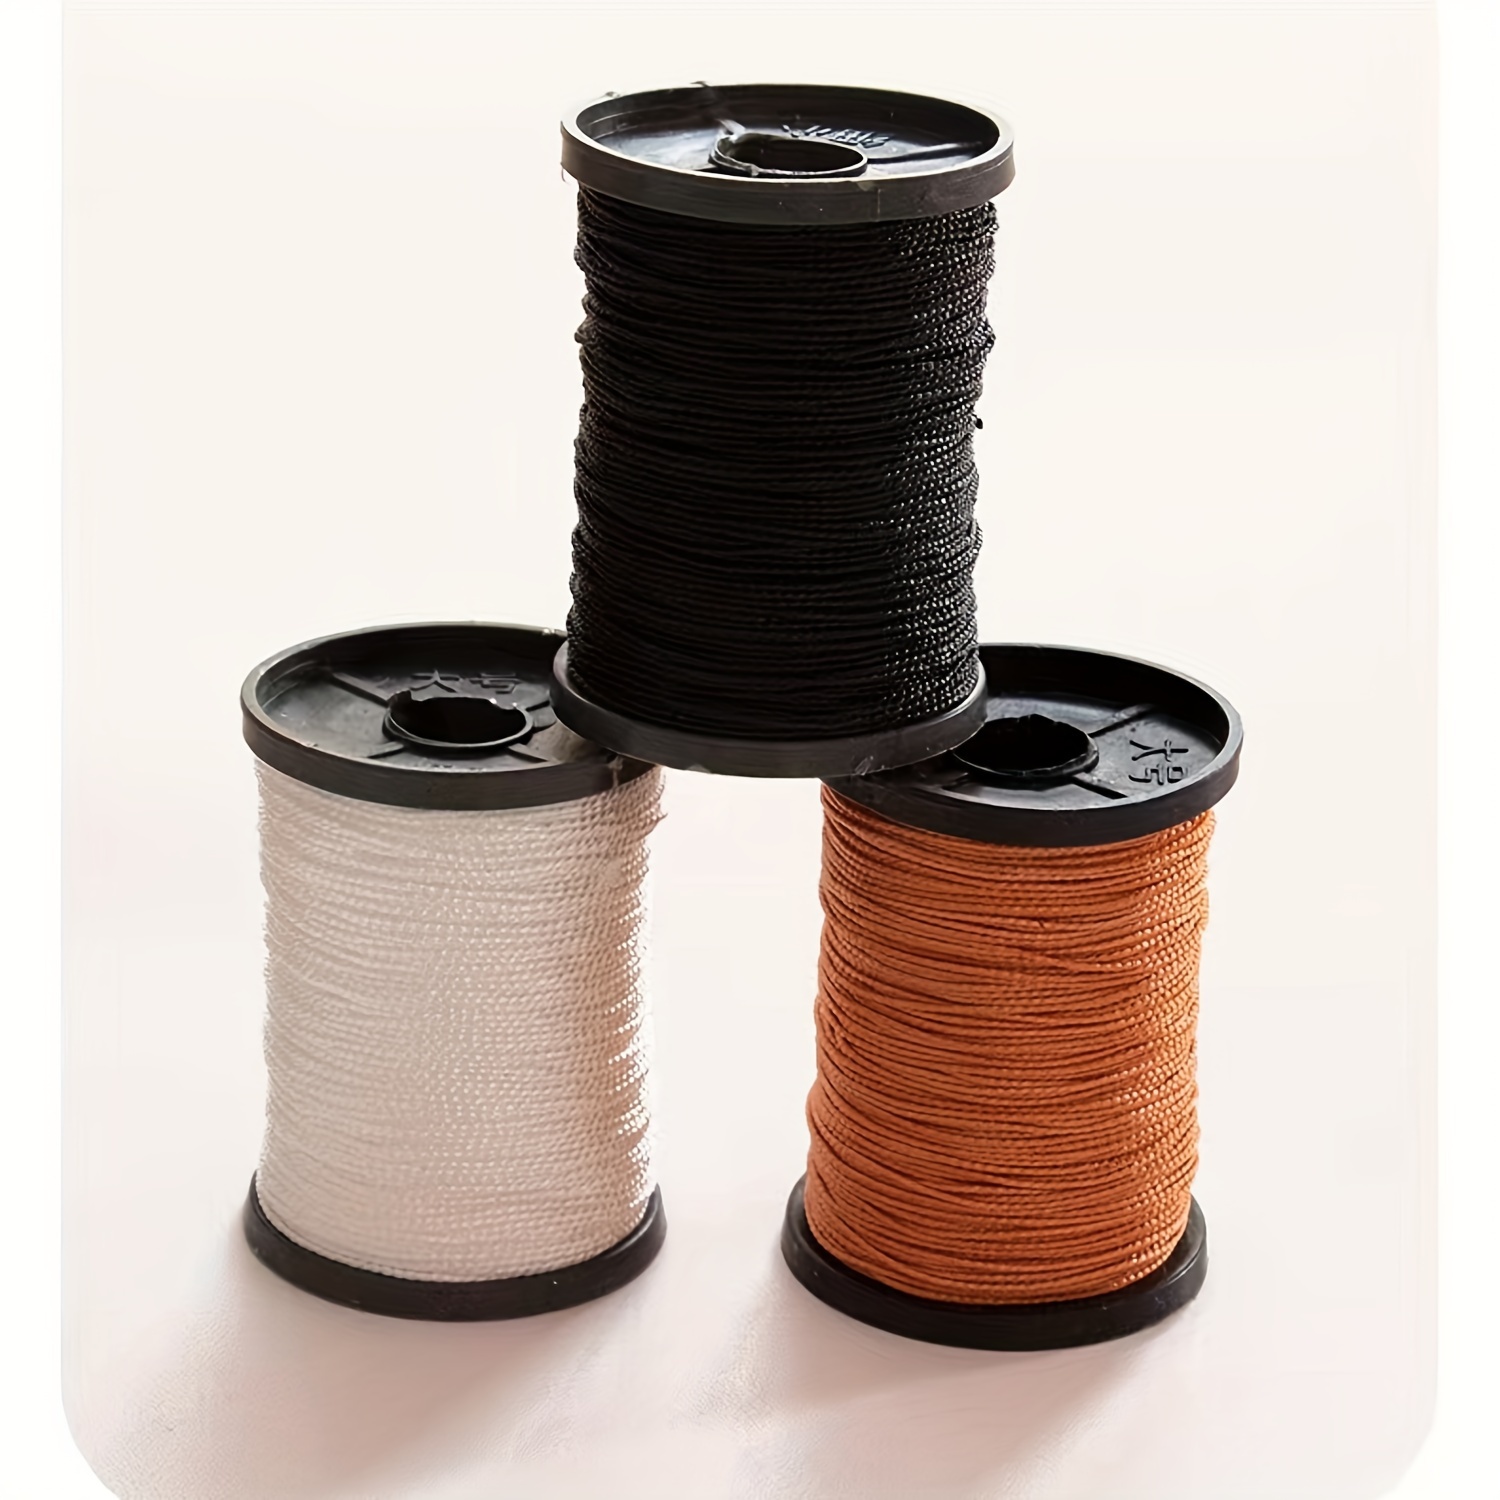 Nylon Fishing Twine Used For Embroidery, Sewing, Fishing Net And